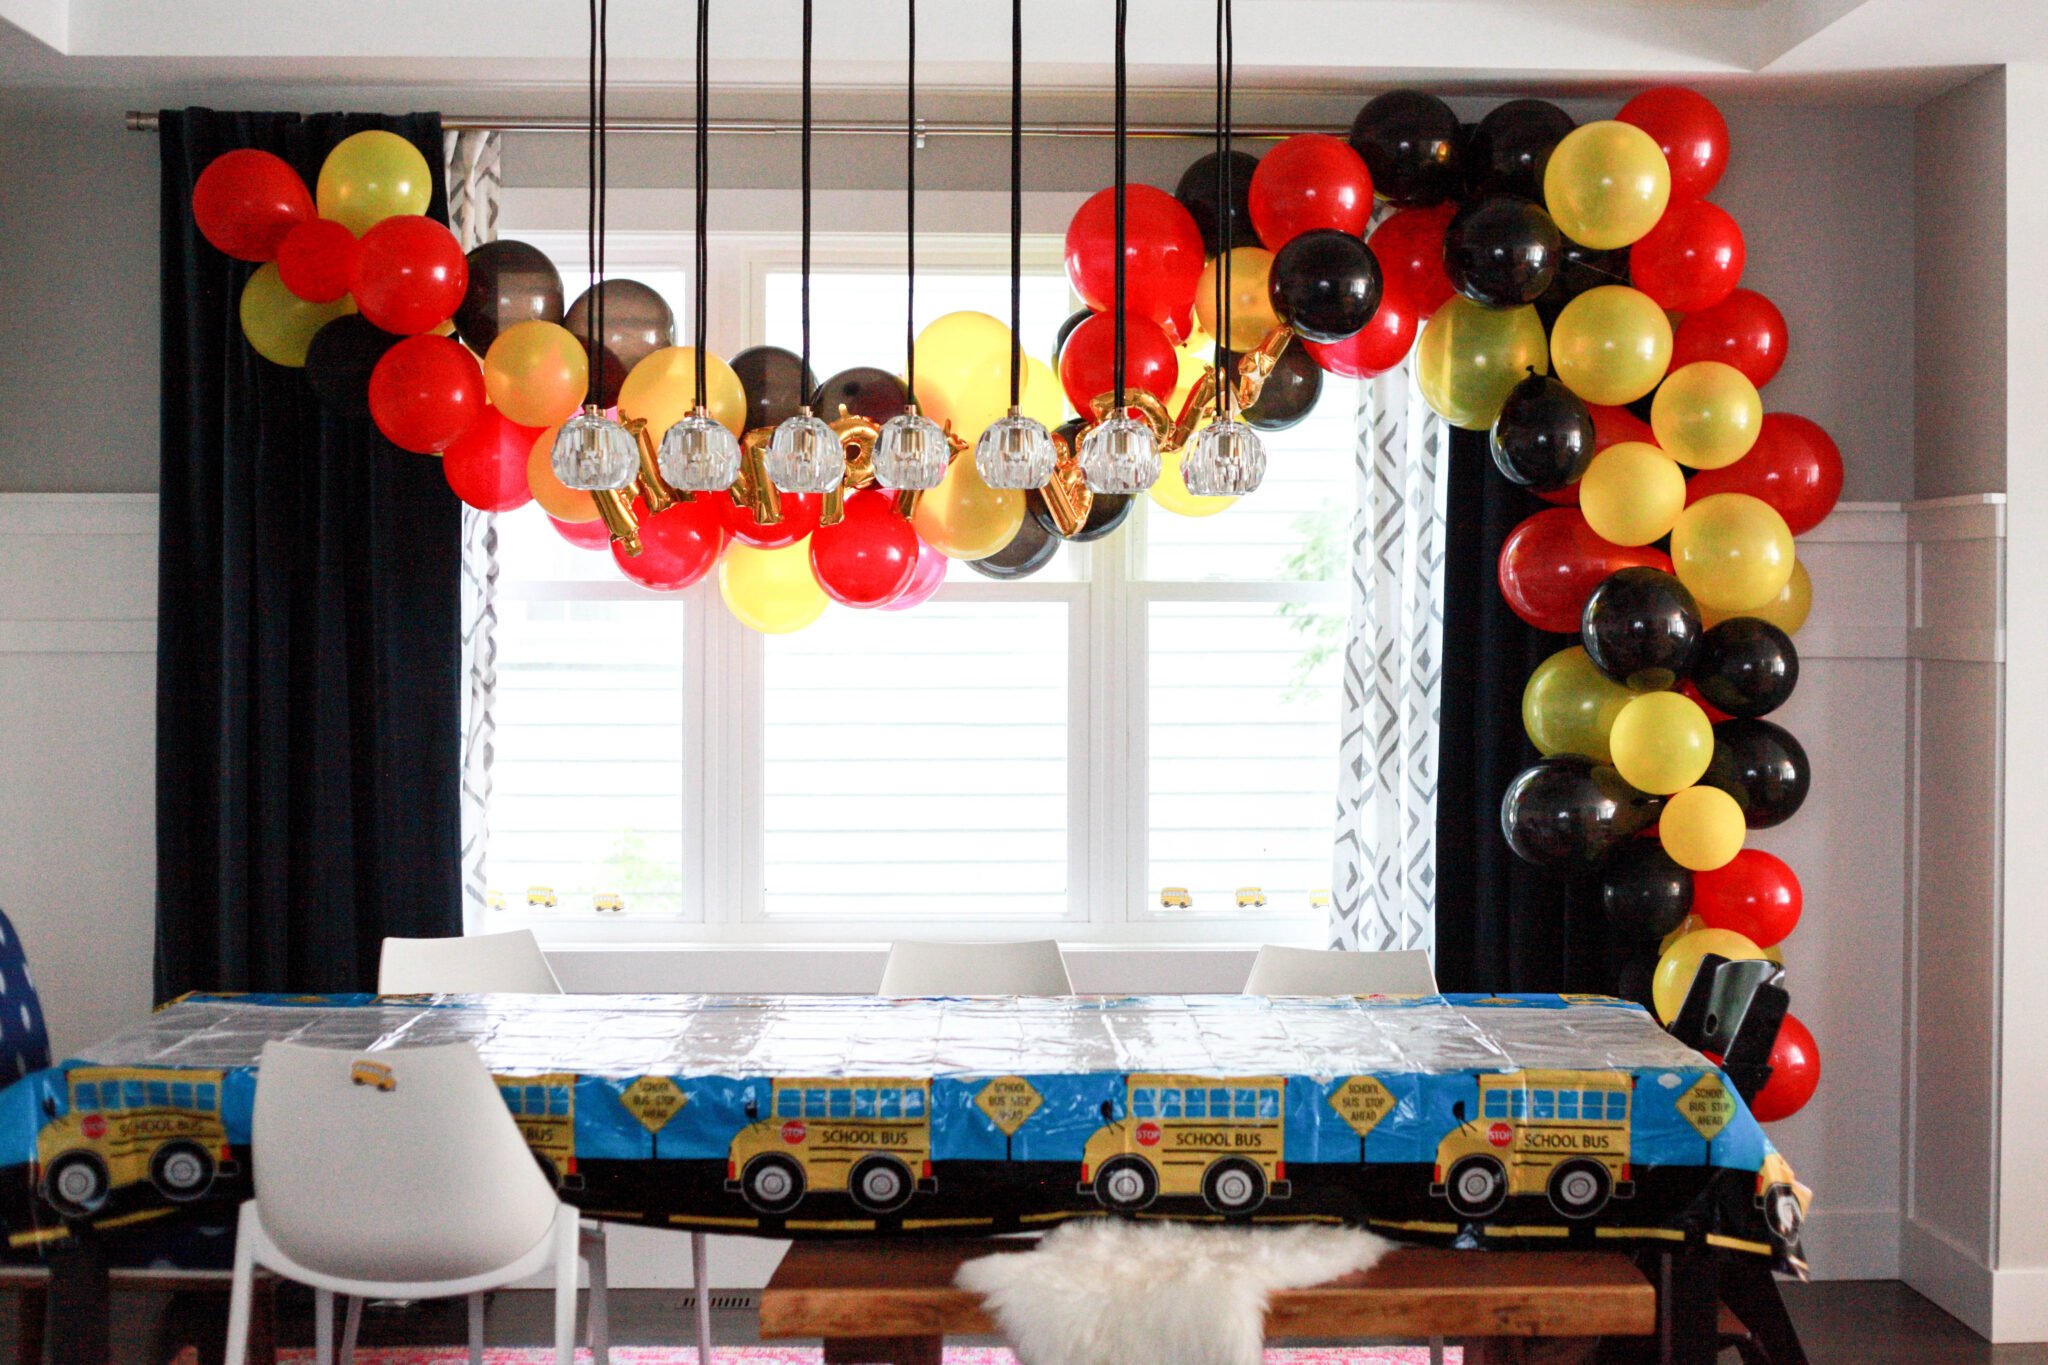 Red, black and yellow balloon arch for a Mickey Mouse birthday party for a 2 year old.